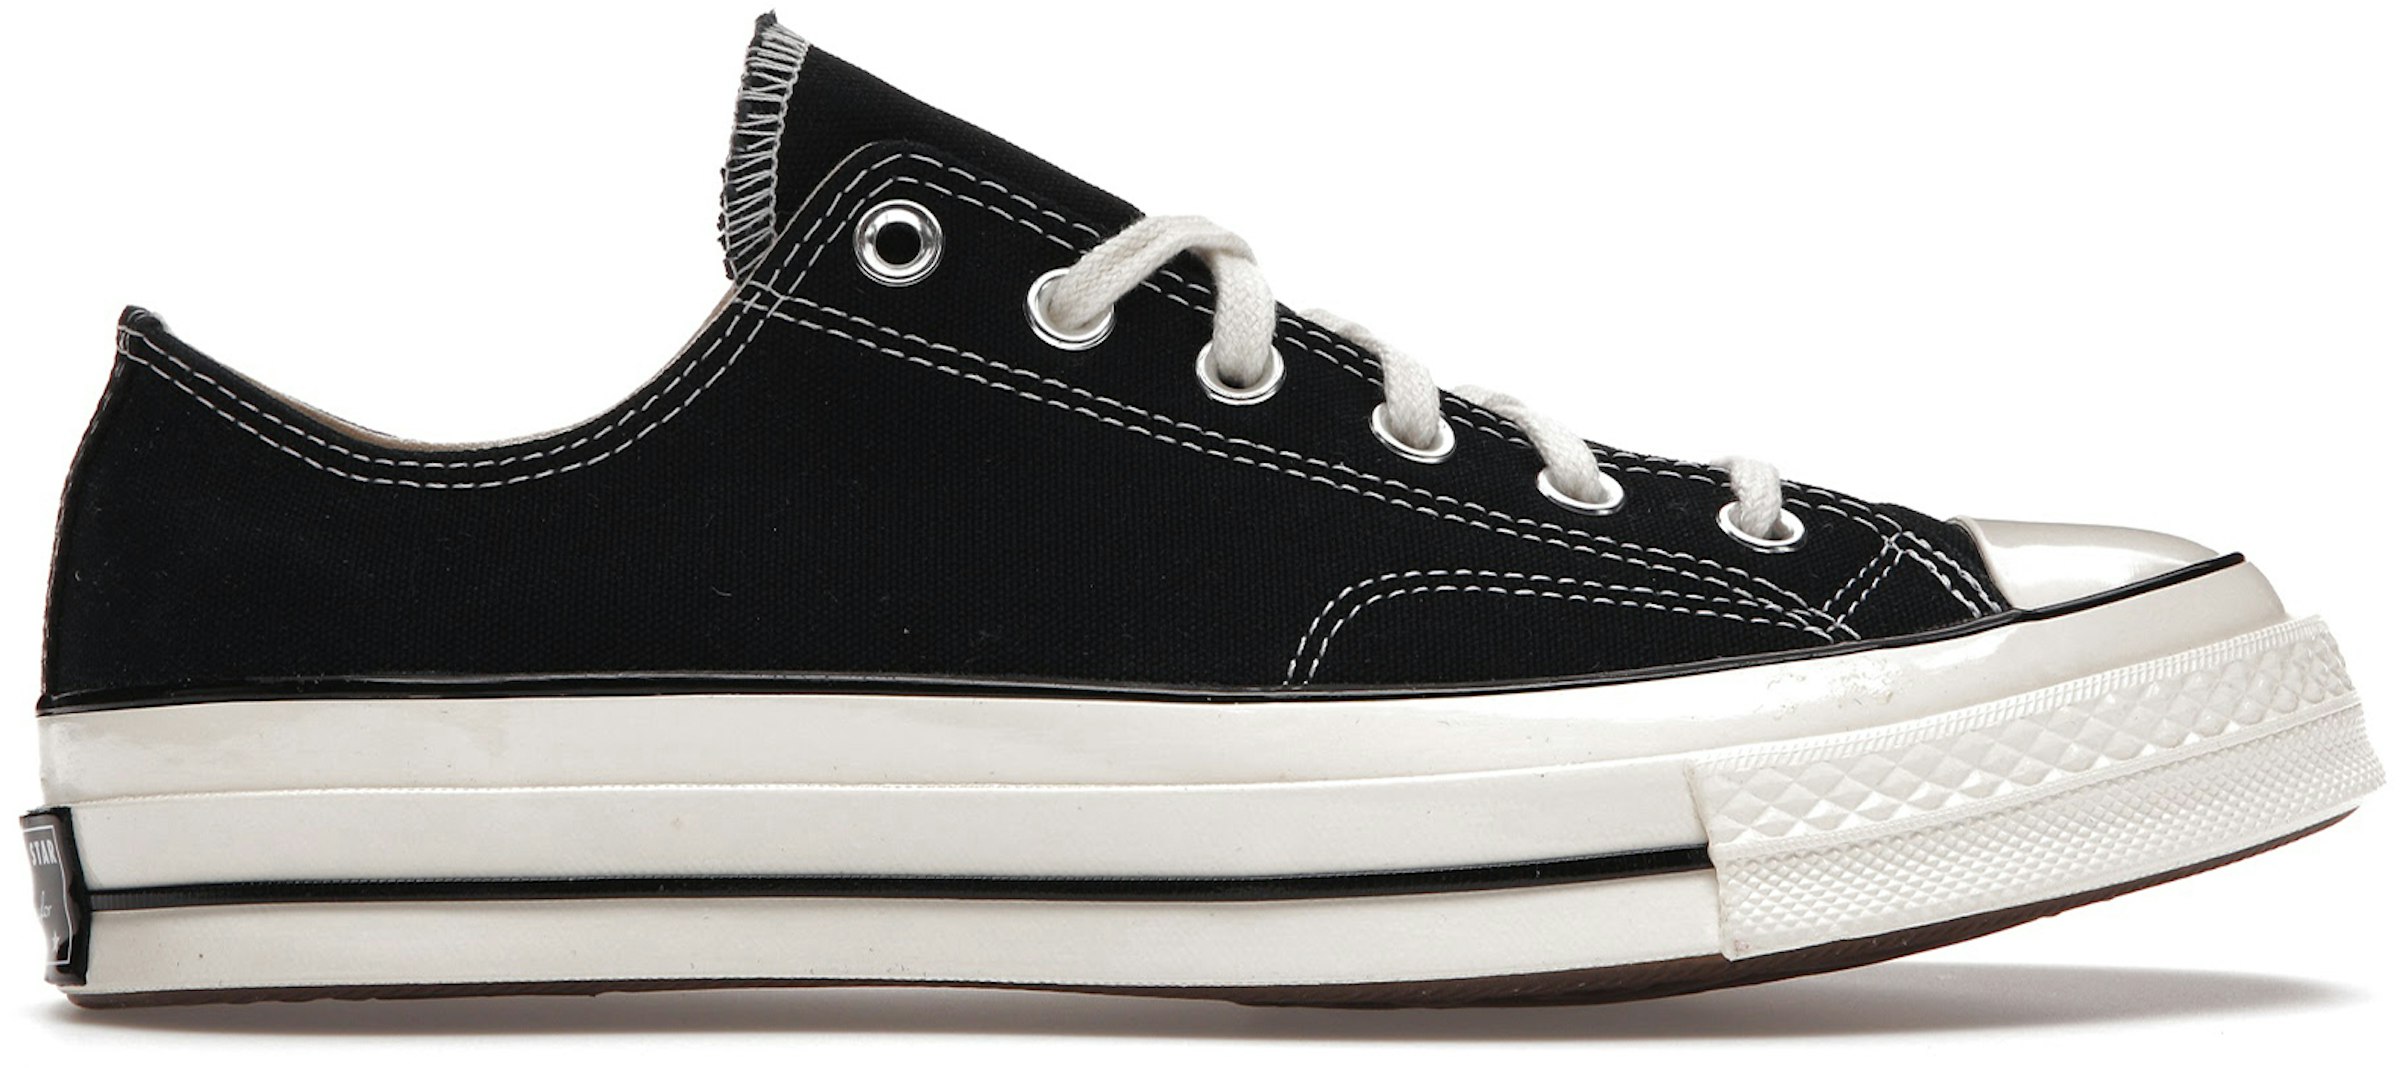 Opiáceo Opaco Acurrucarse Converse Chuck Taylor All-Star 70 Ox Black White Men's - 162058C - US